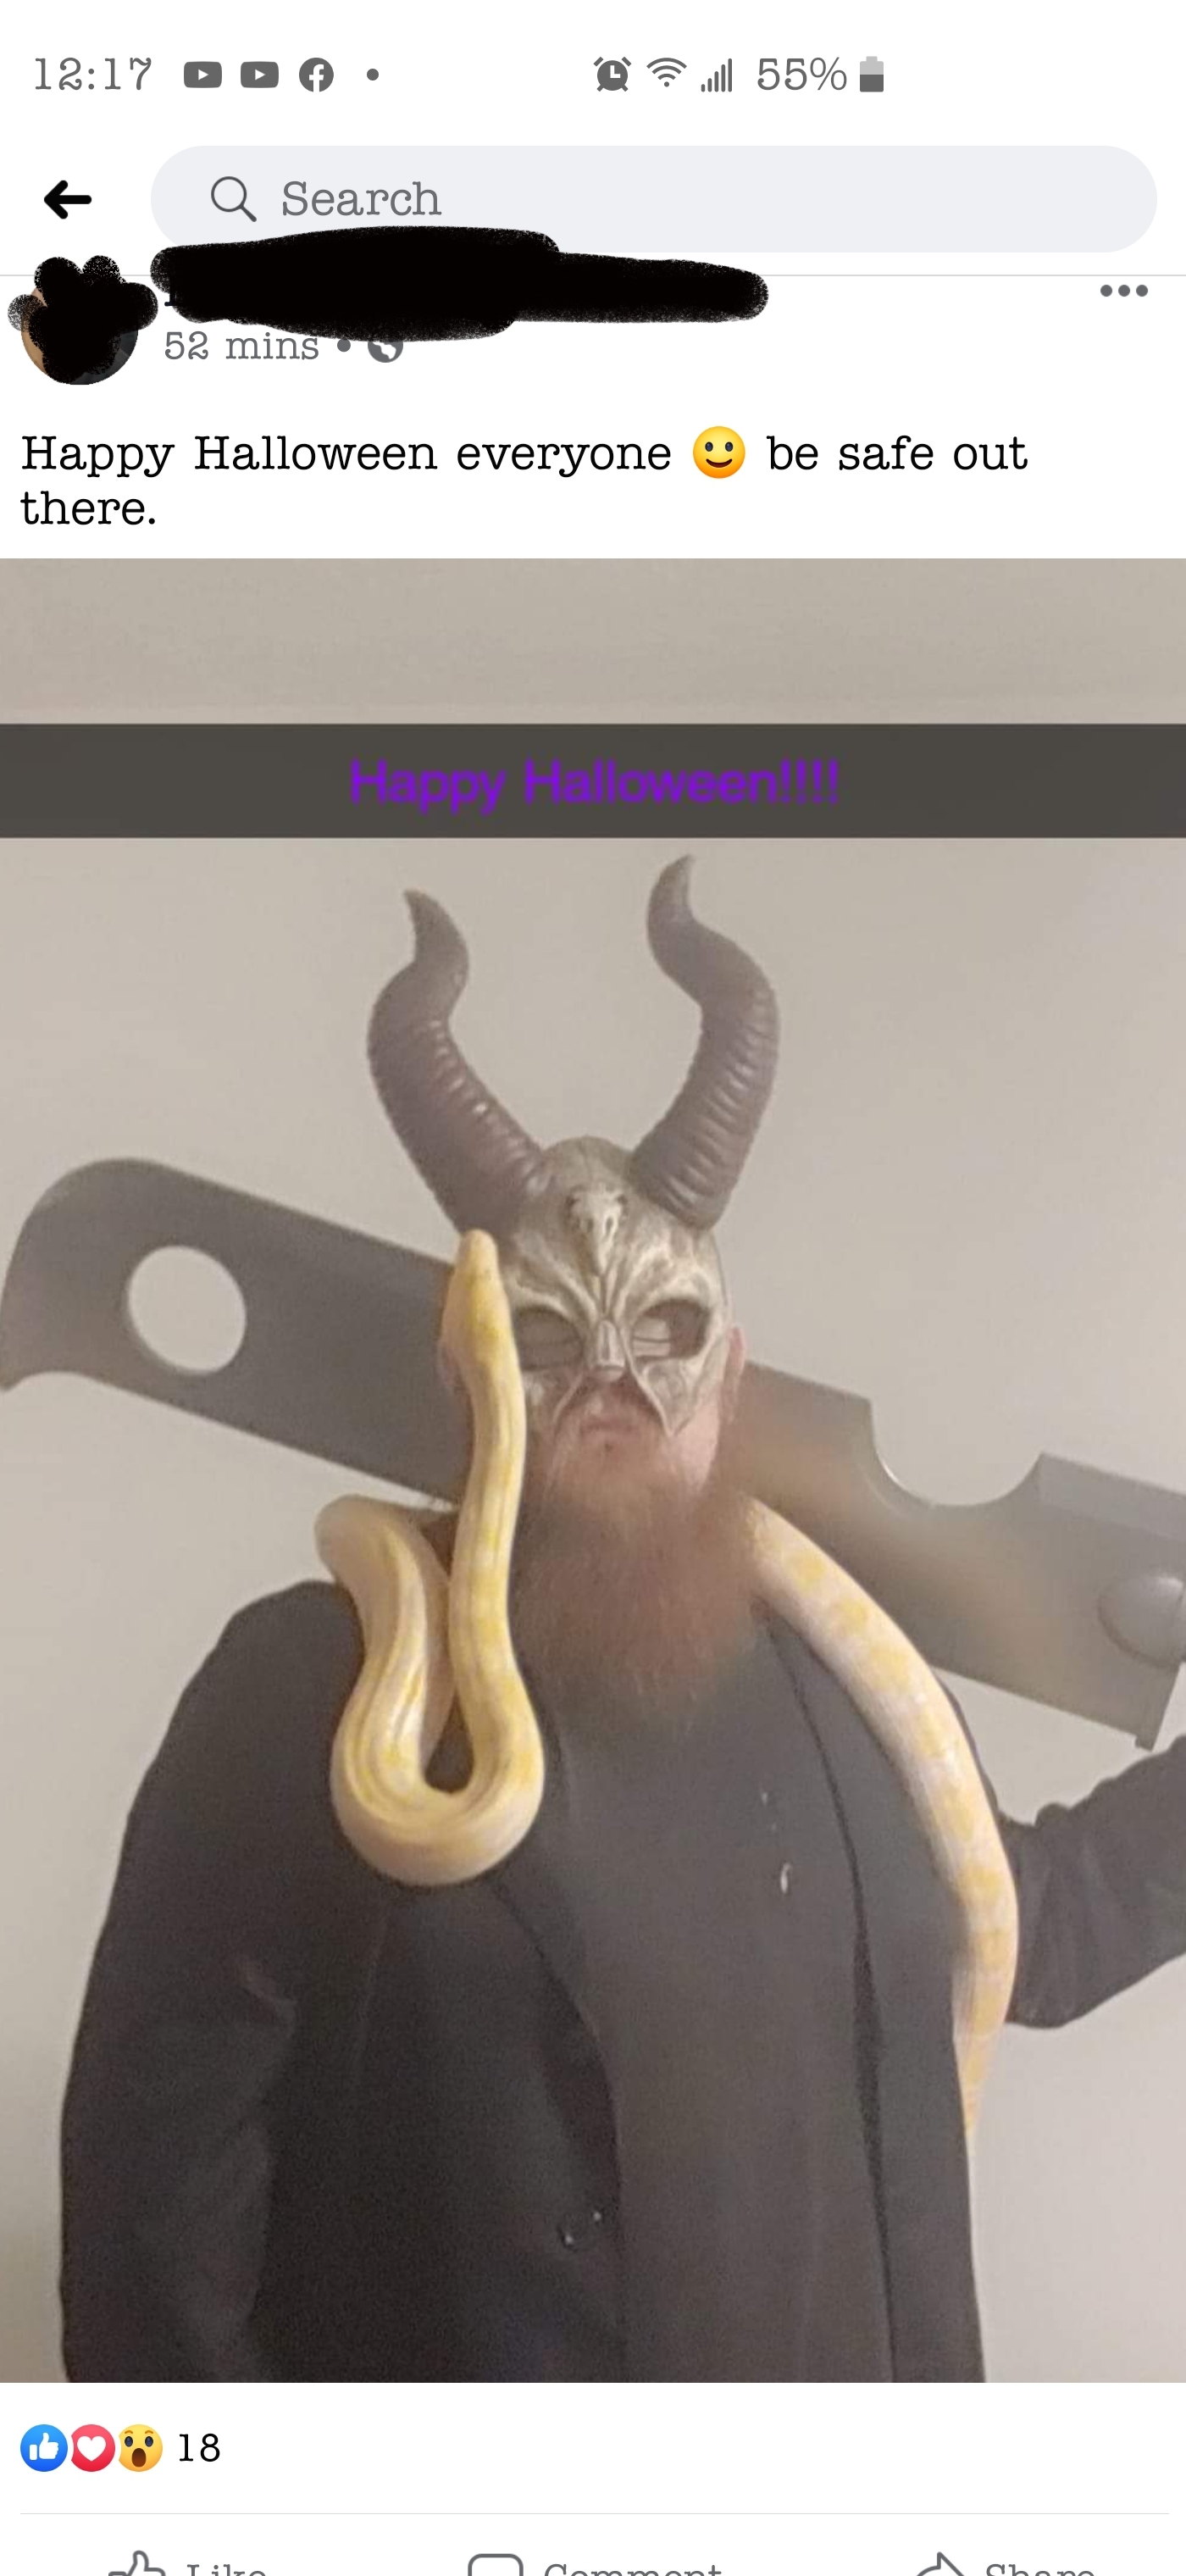 horn - Do 65% Q Search Happy Halloween everyone there. be safe out 00 18